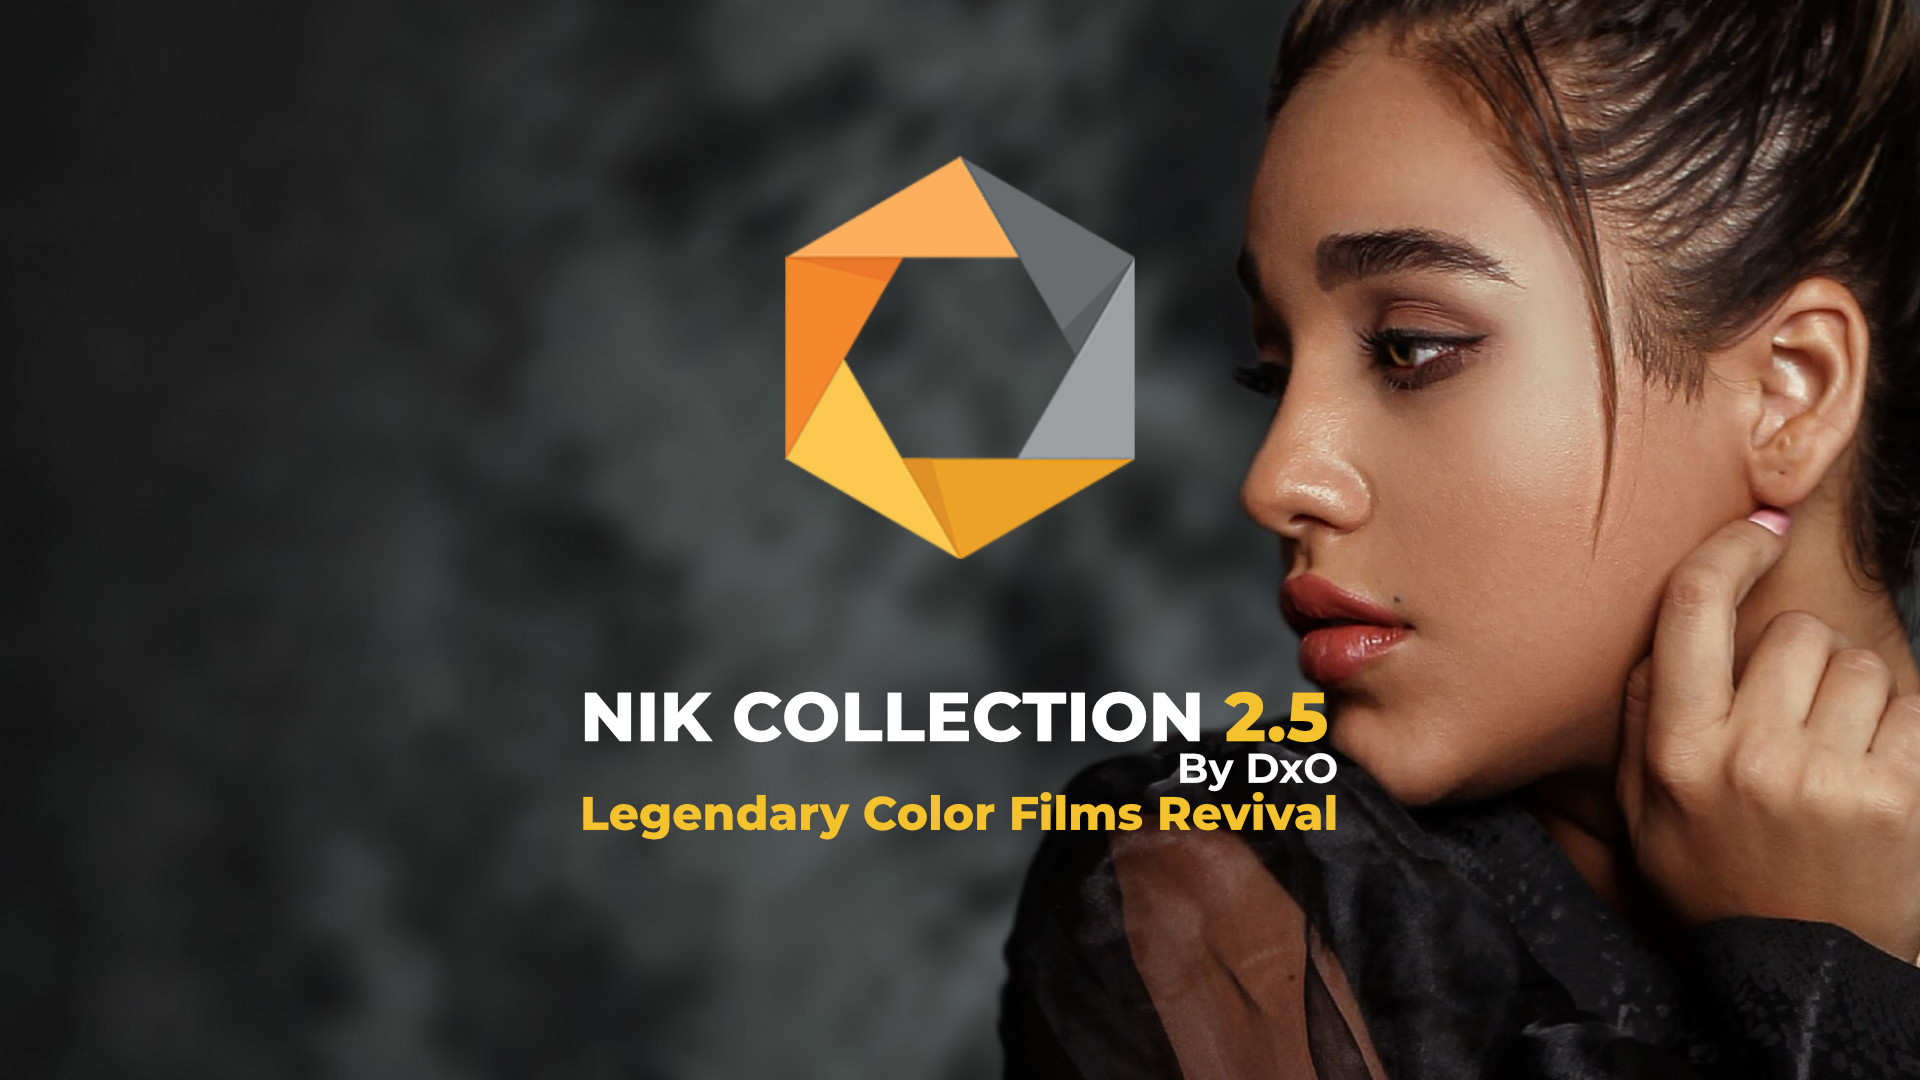 Nik Collection by DxO 6.2.0 instal the new for android